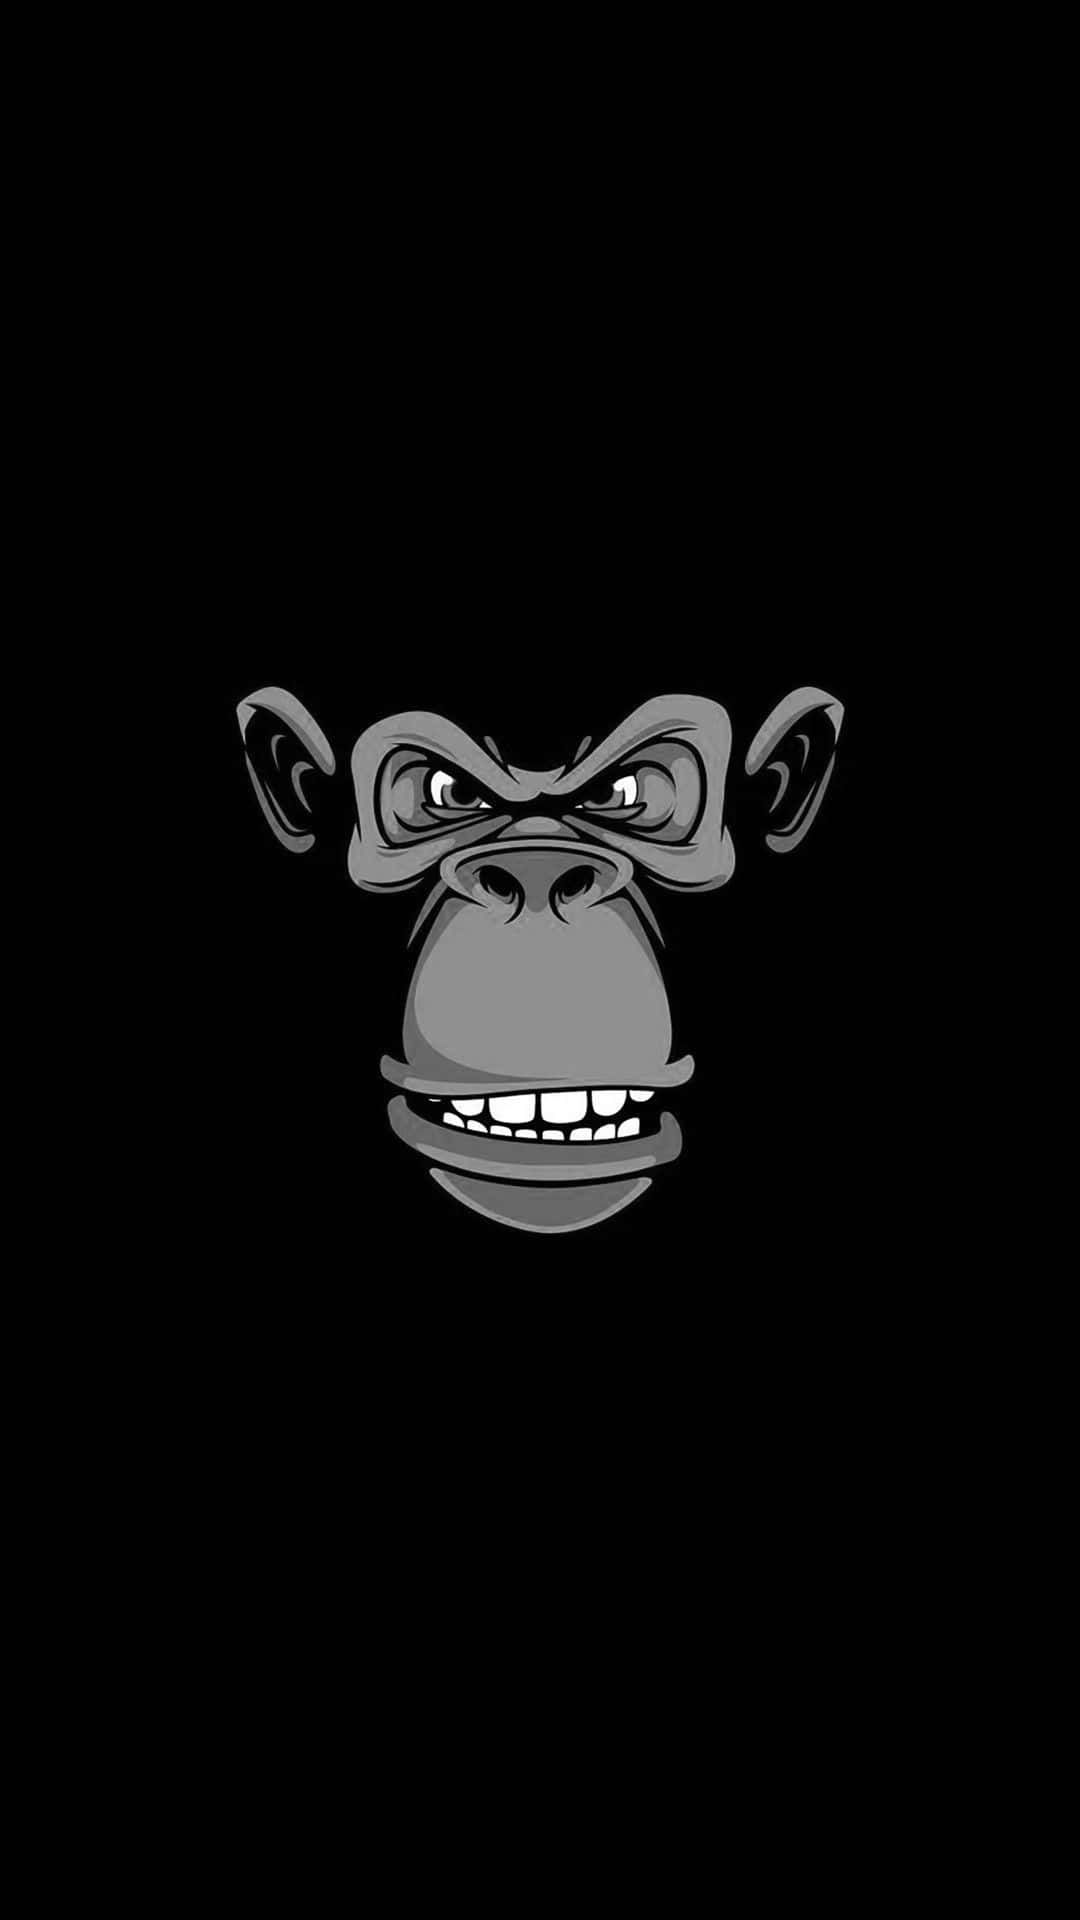 A Black Background With A Gorilla Face On It Wallpaper